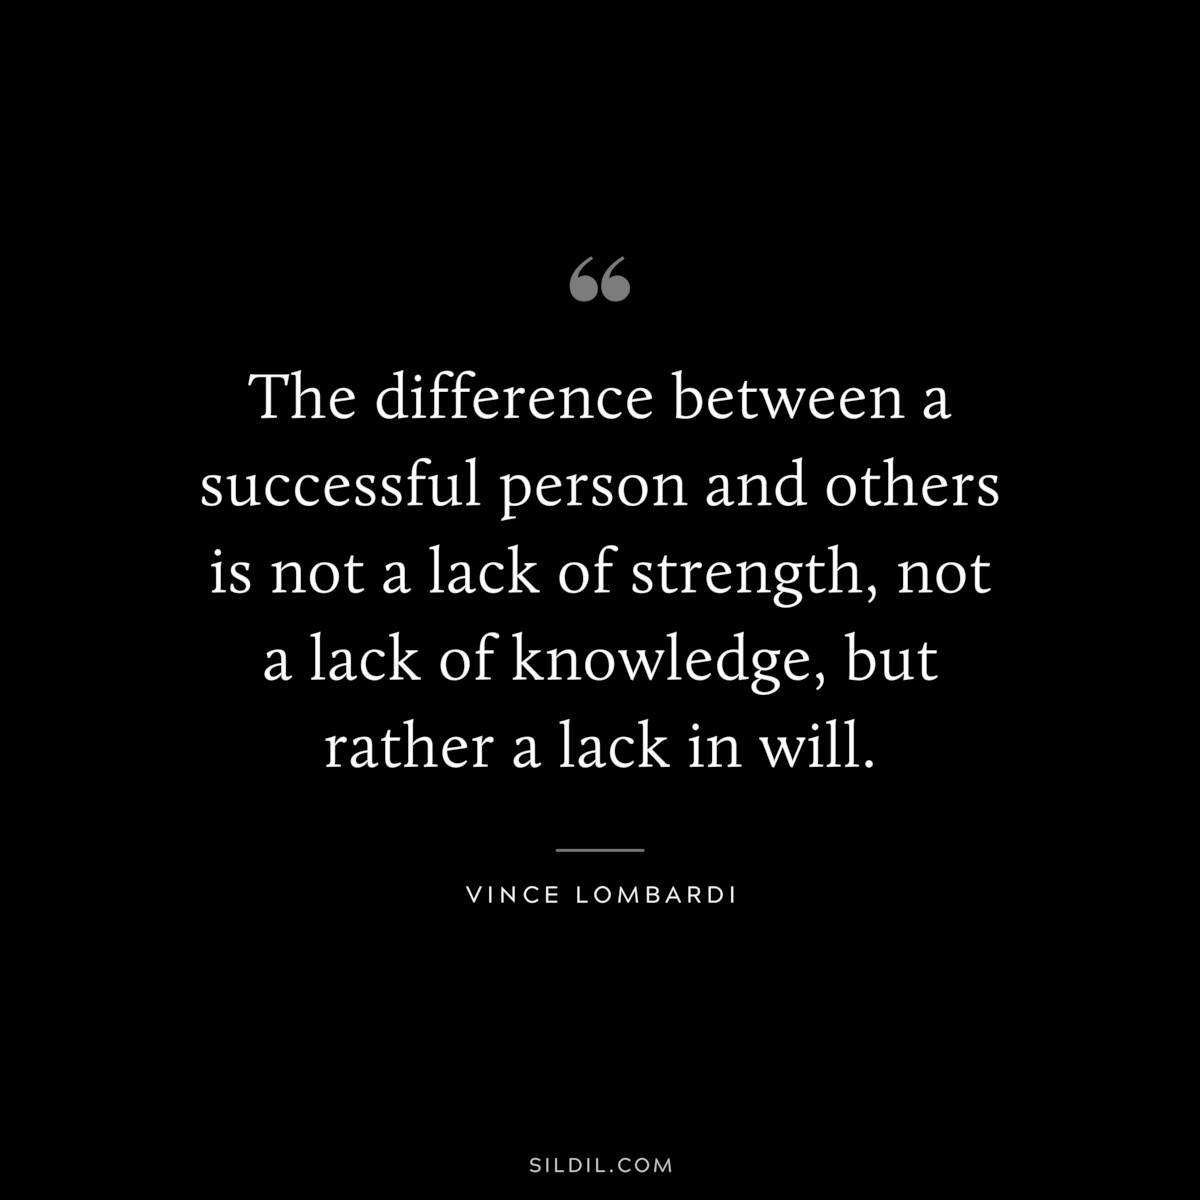 The difference between a successful person and others is not a lack of strength, not a lack of knowledge, but rather a lack in will. ― Vince Lombardi